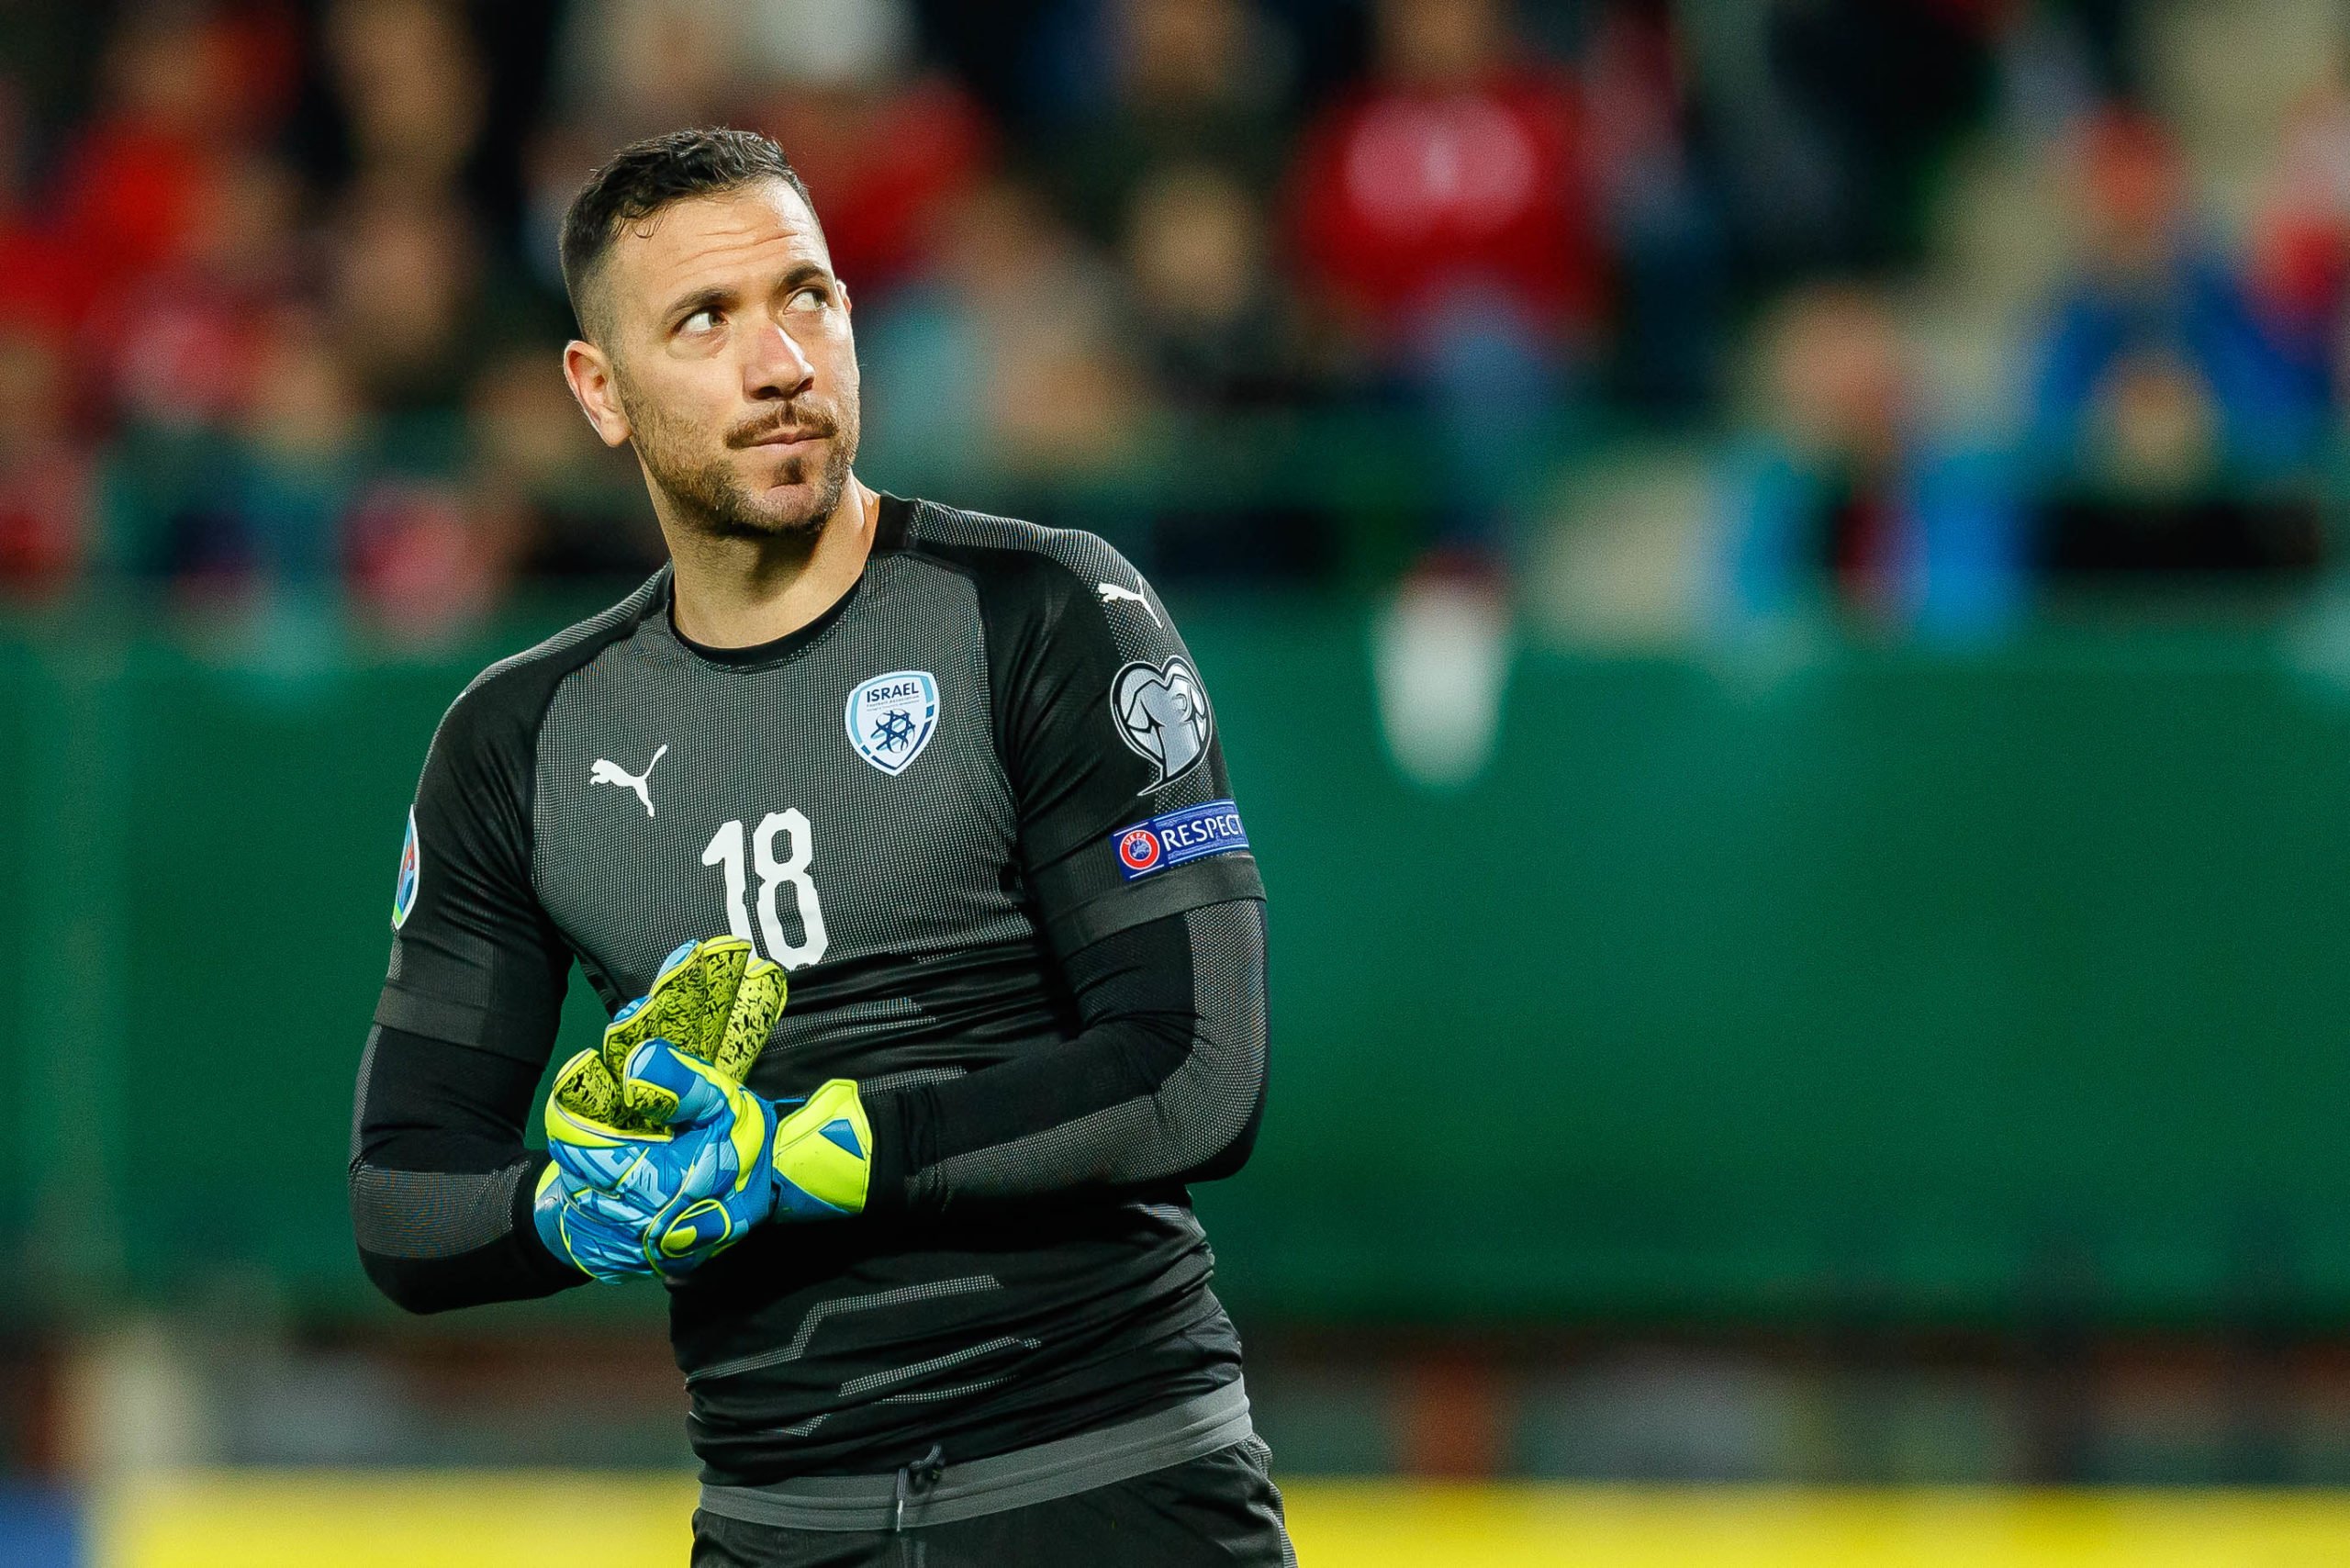 Celtic tipped to make move for in form goalkeeper